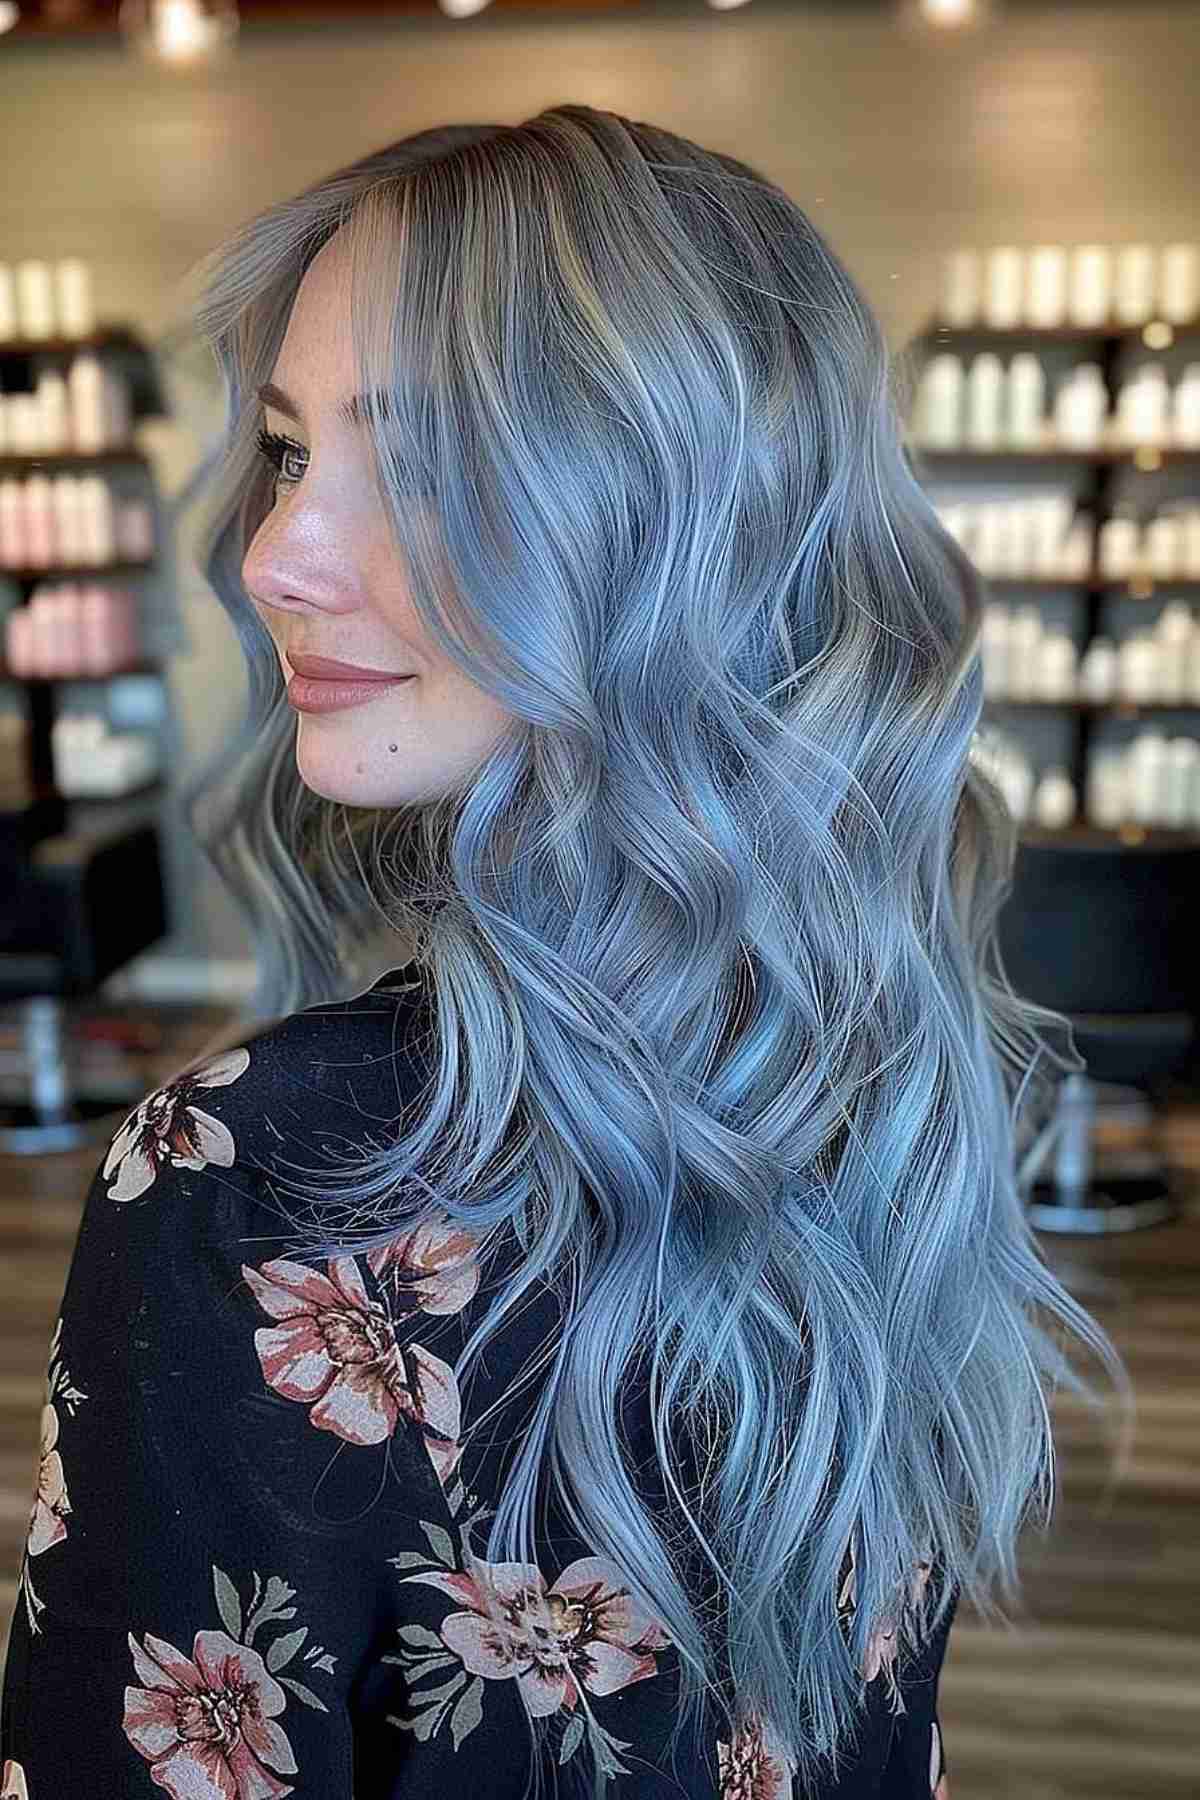 Long, wavy hair with a stunning gradient from natural silver to bold ice blue on a young woman, showcasing the trendy and edgy hair color transition